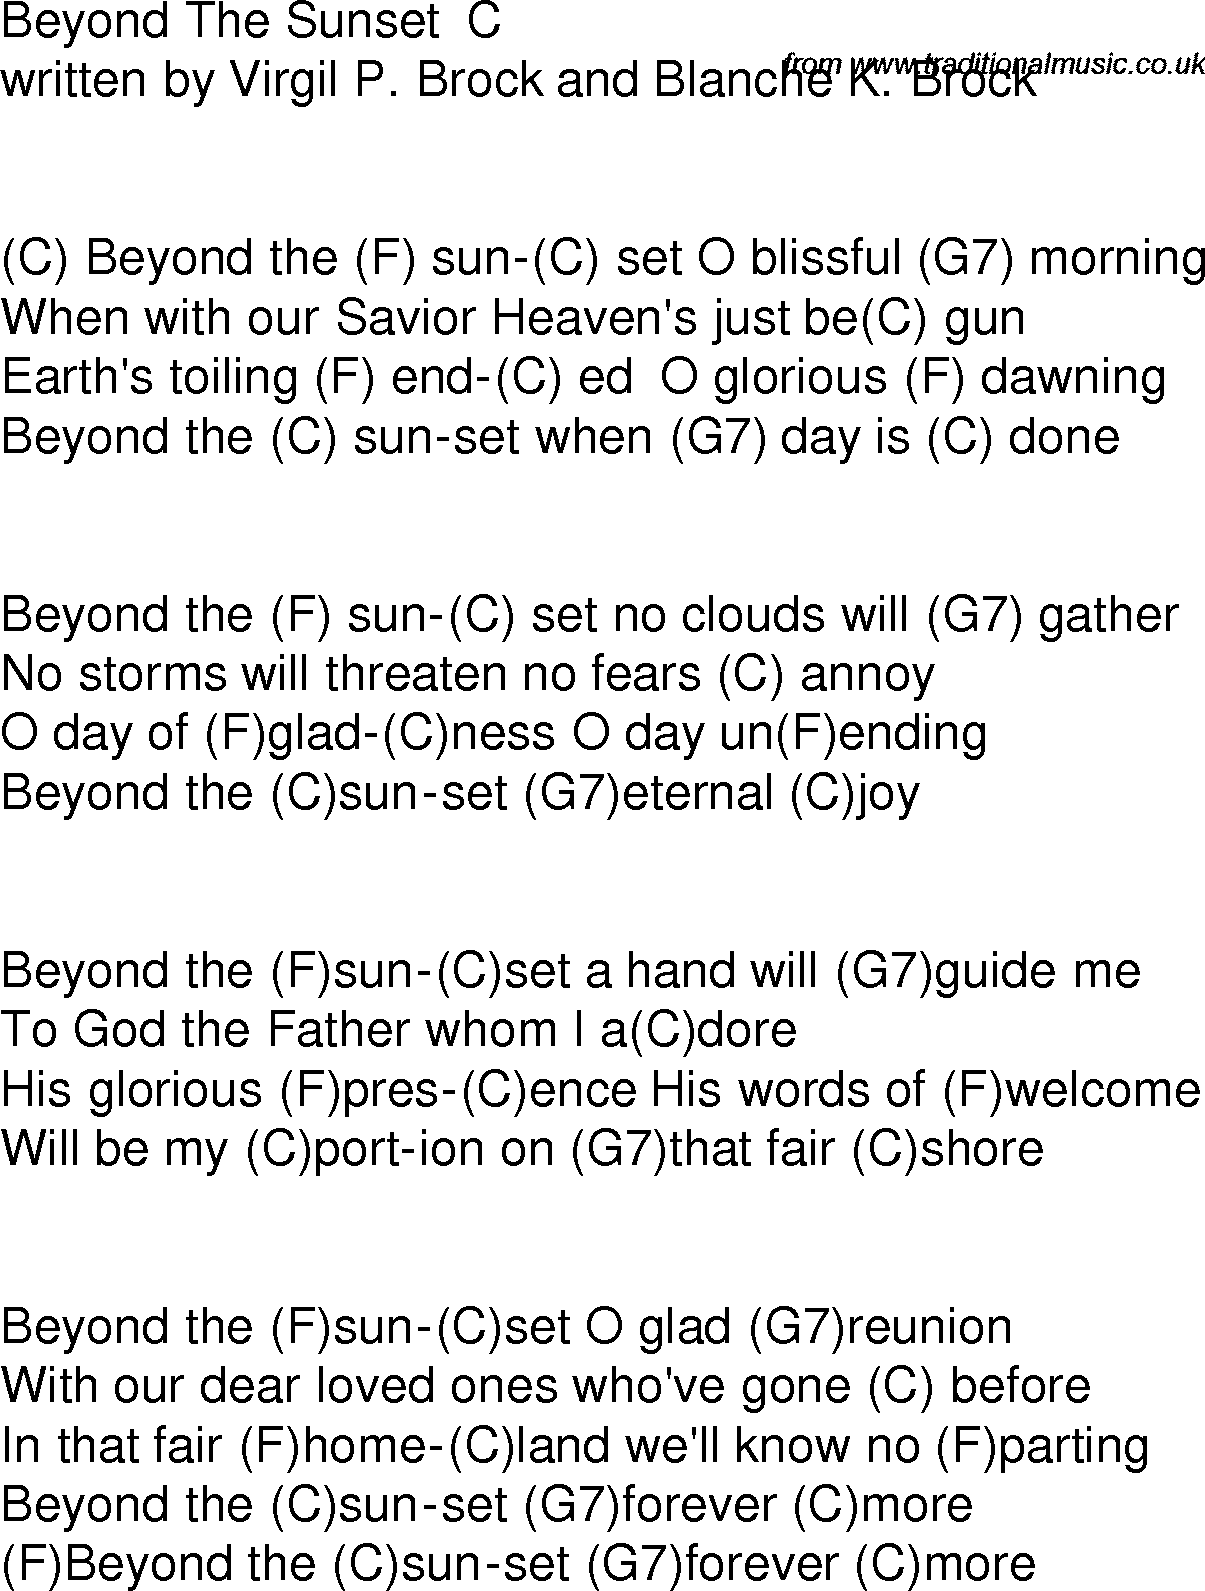 Old time song lyrics with chords for Beyond The Sunset C